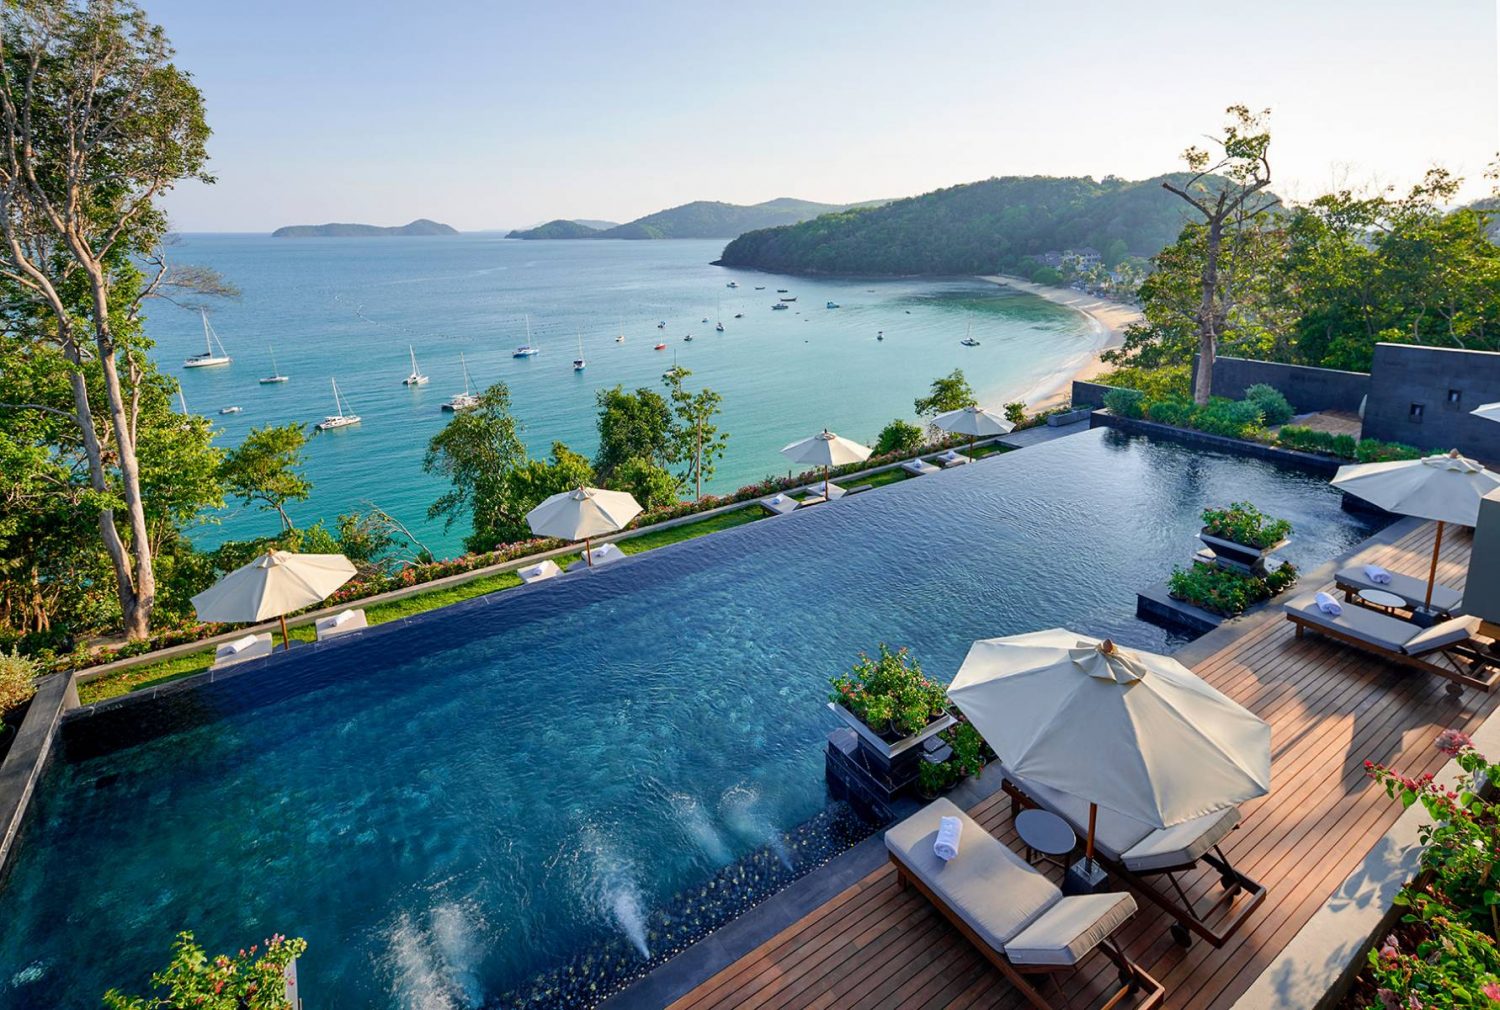 Transform Your Phuket Stay: Essential Amenities to Look For